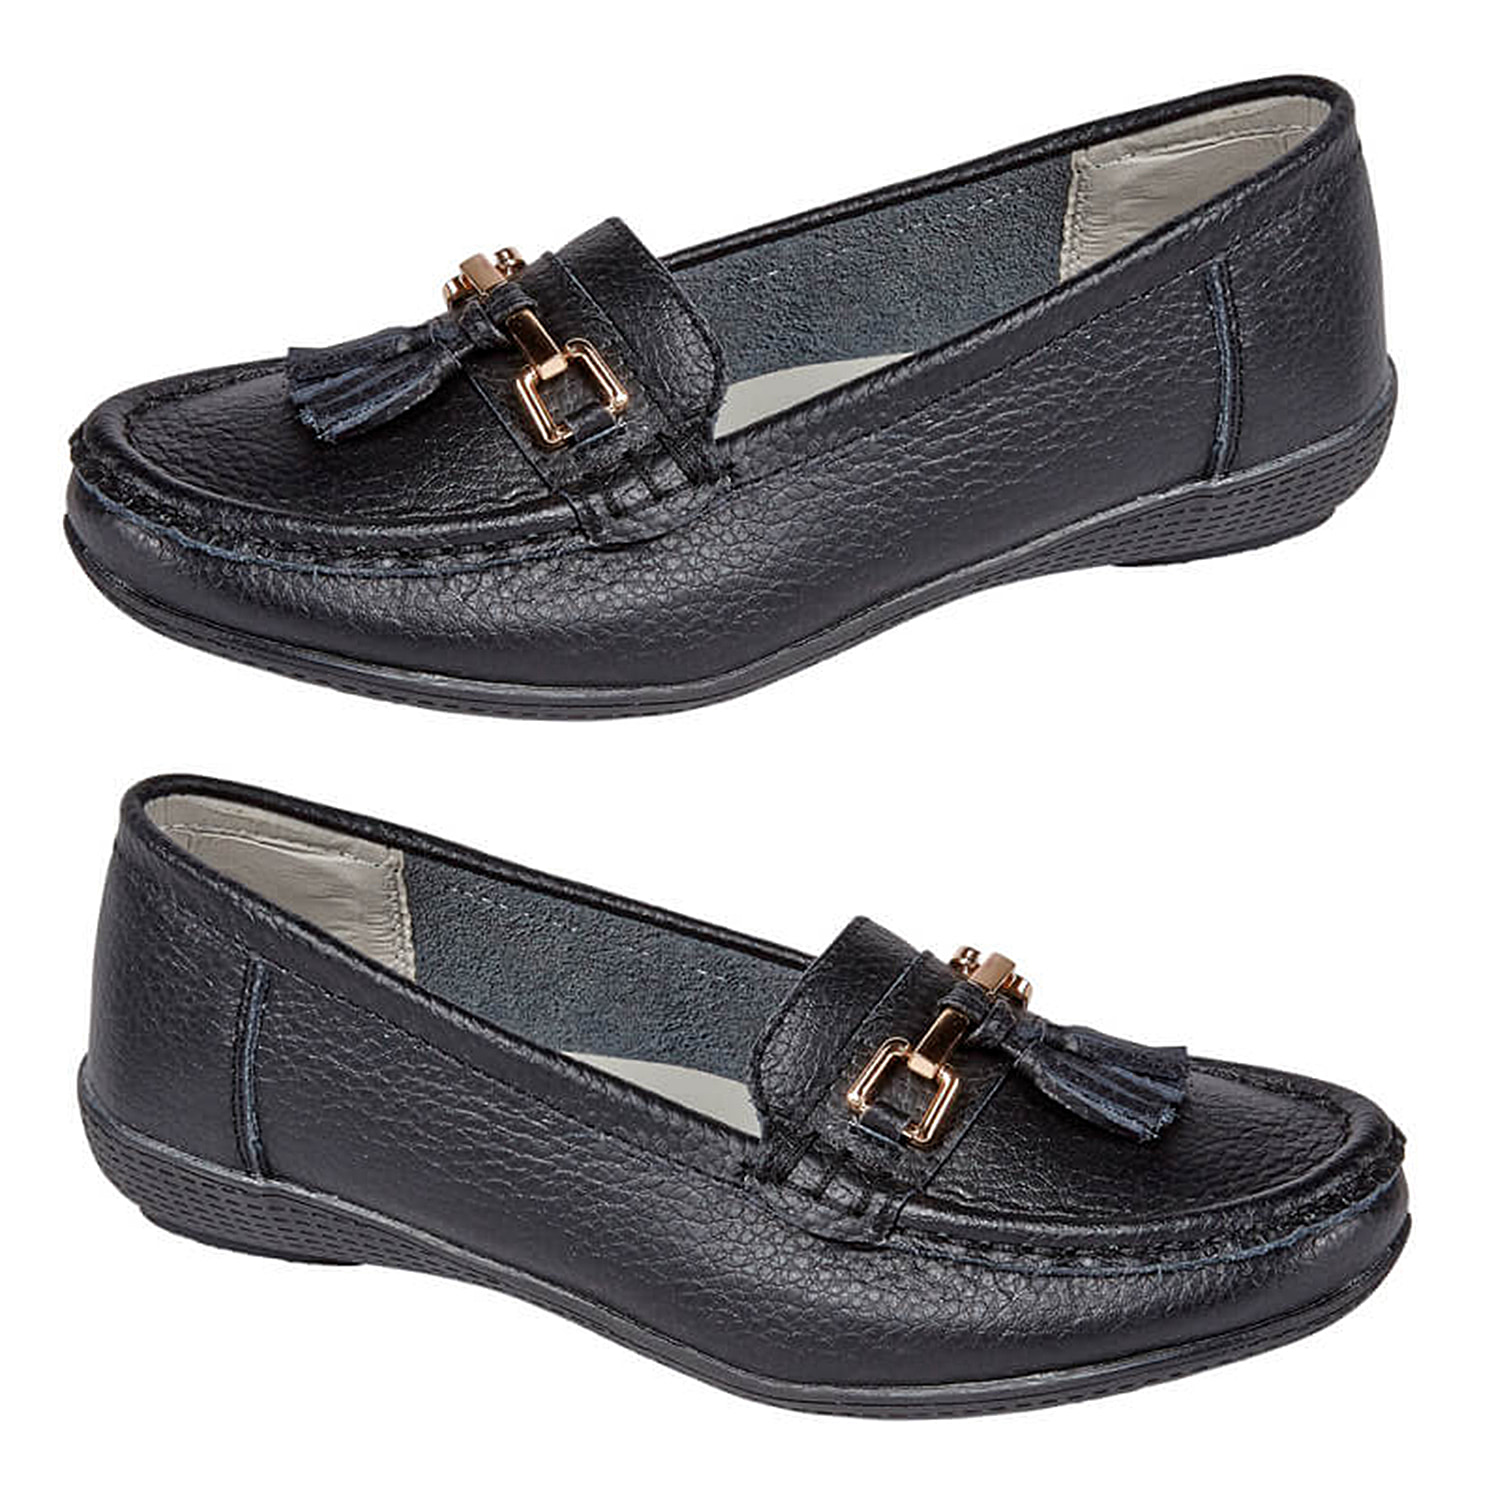 Womens Slip on Casual Leather Loafer with Tassle (Size 3) - Black